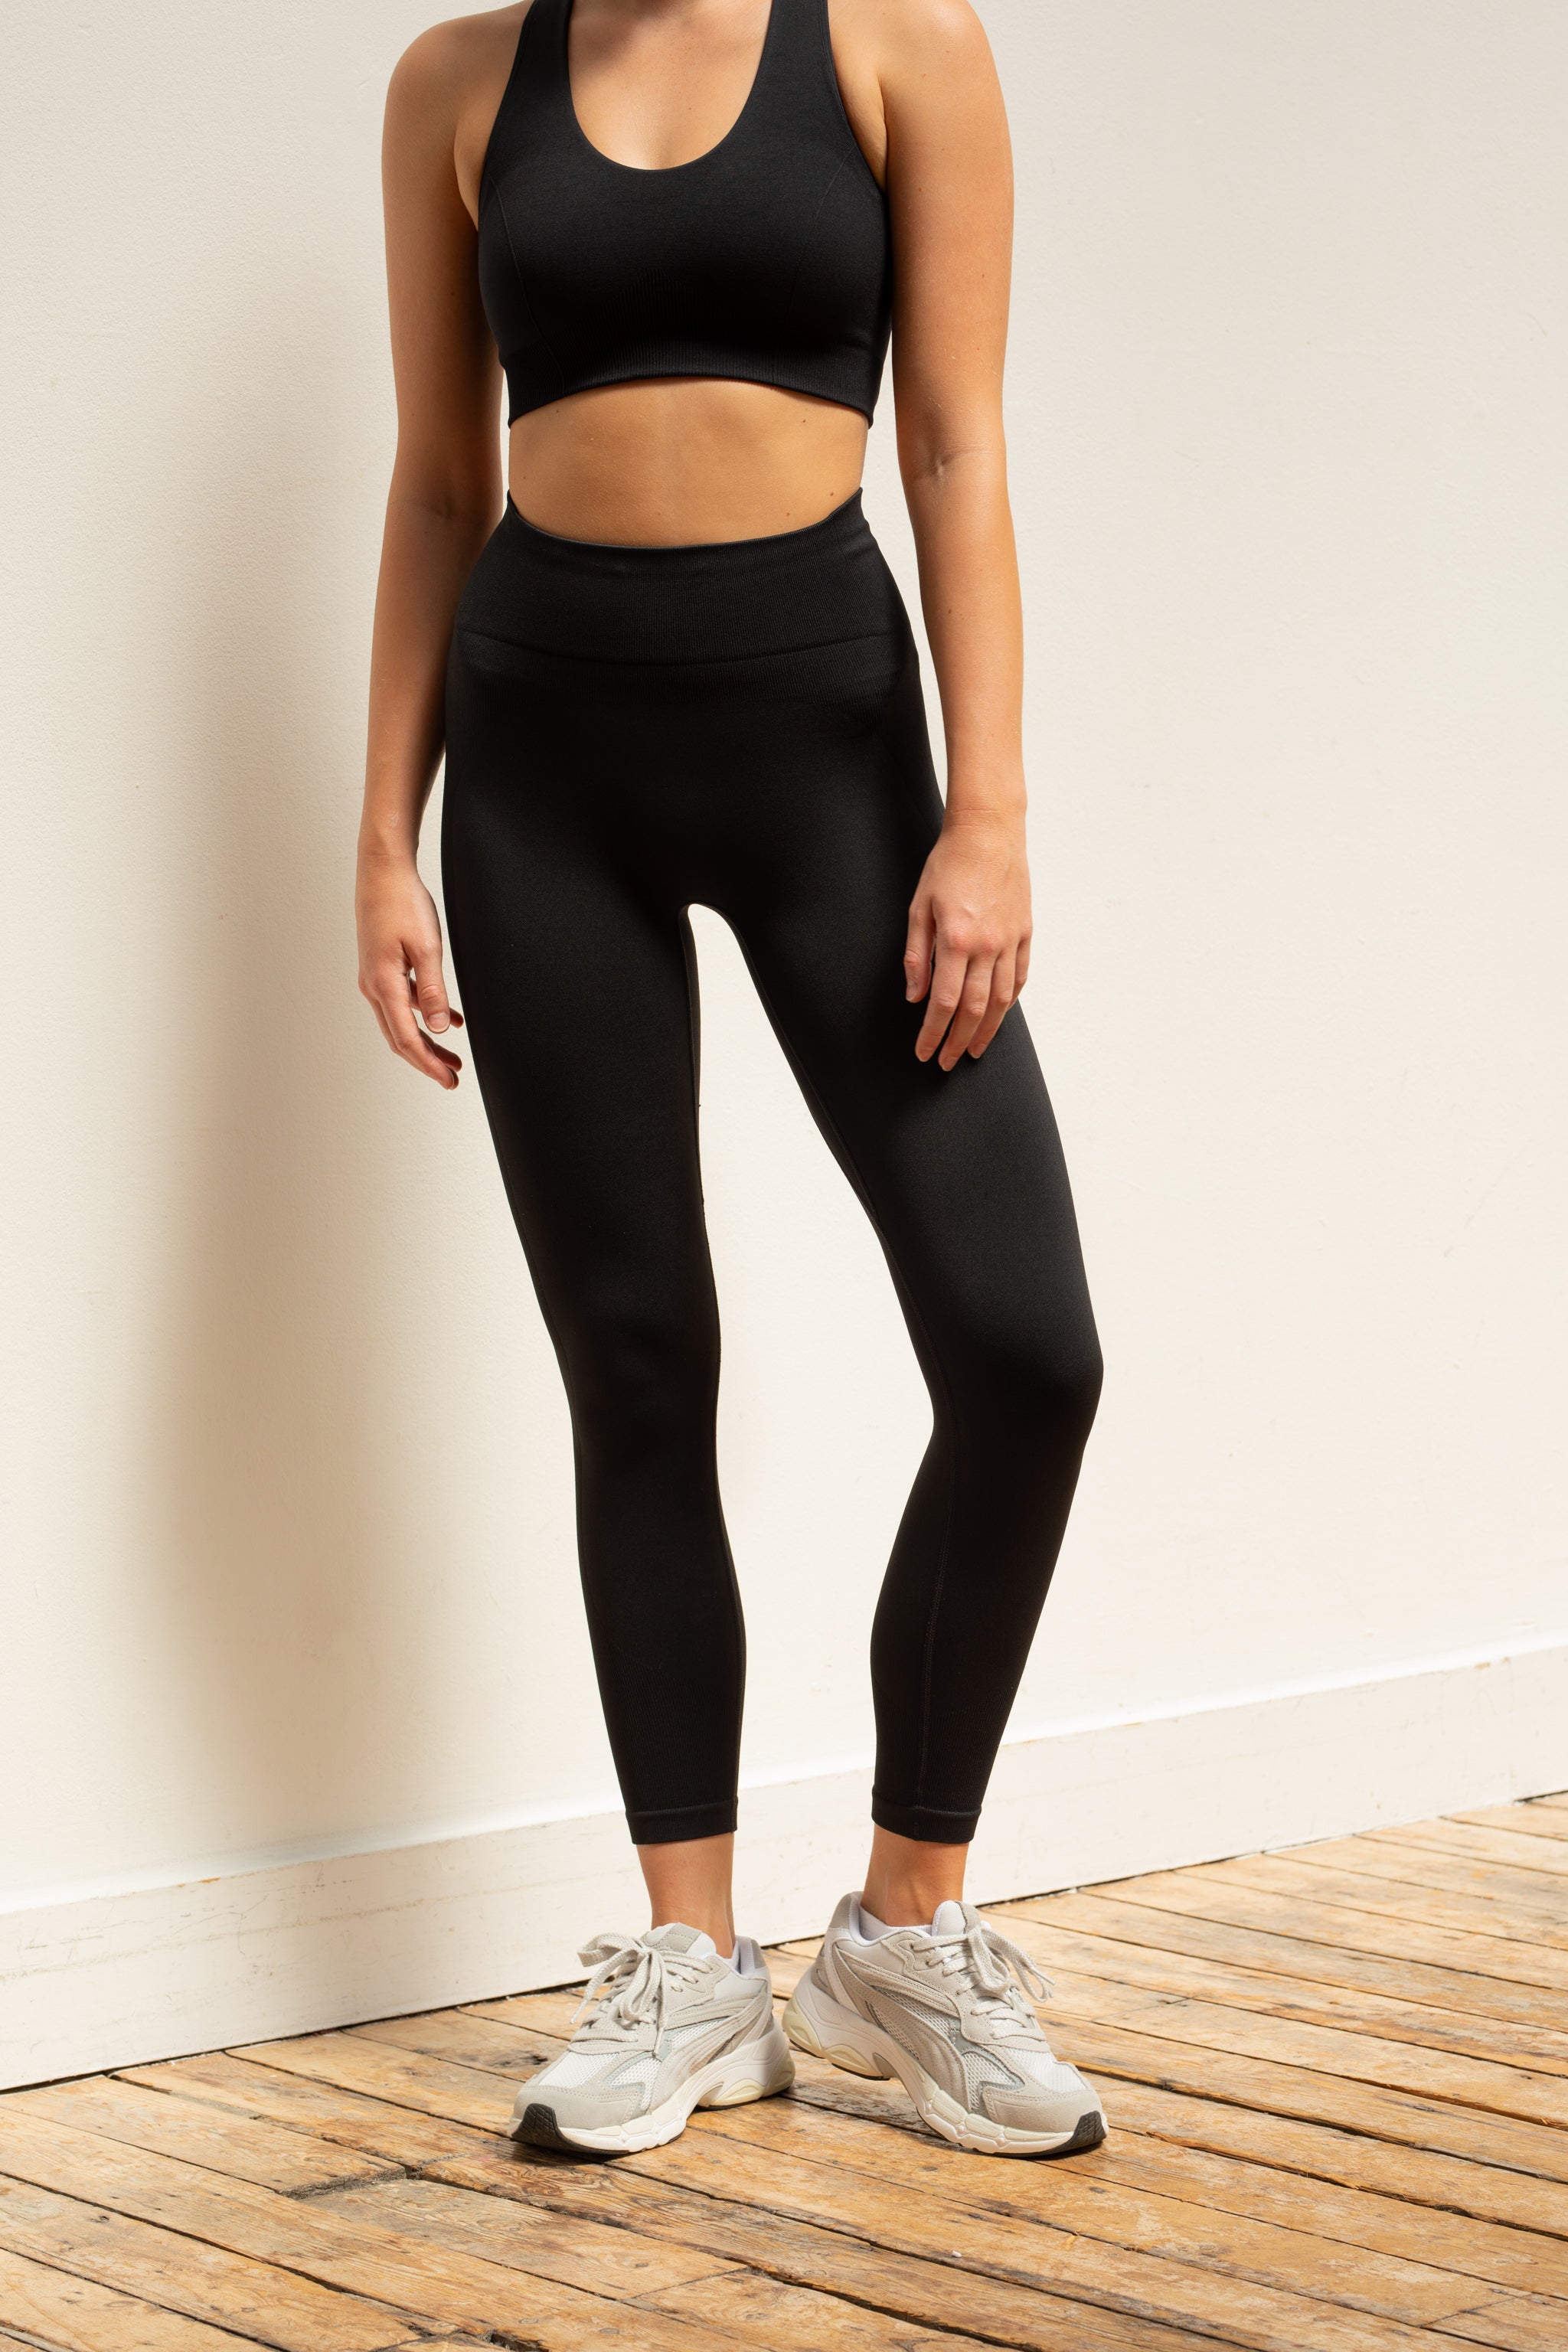 Black supportive sports bra and black recycled cropped leggings by sustainable women's activewear brand Jilla